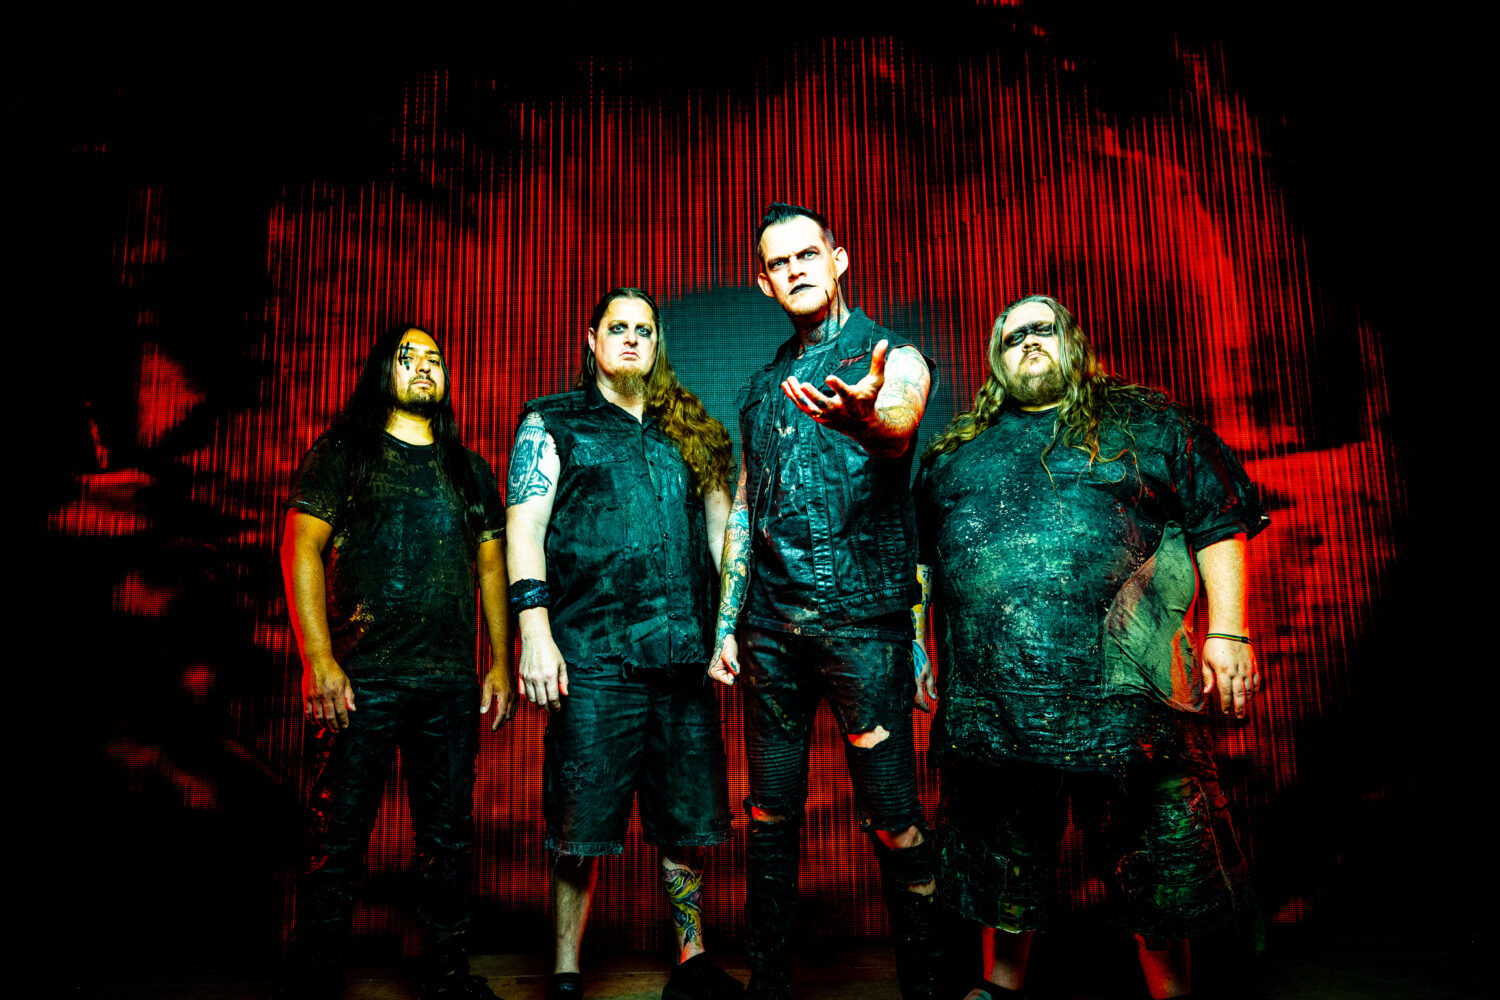 Carnifex releases a new album and a visualizer for the single 'Cold